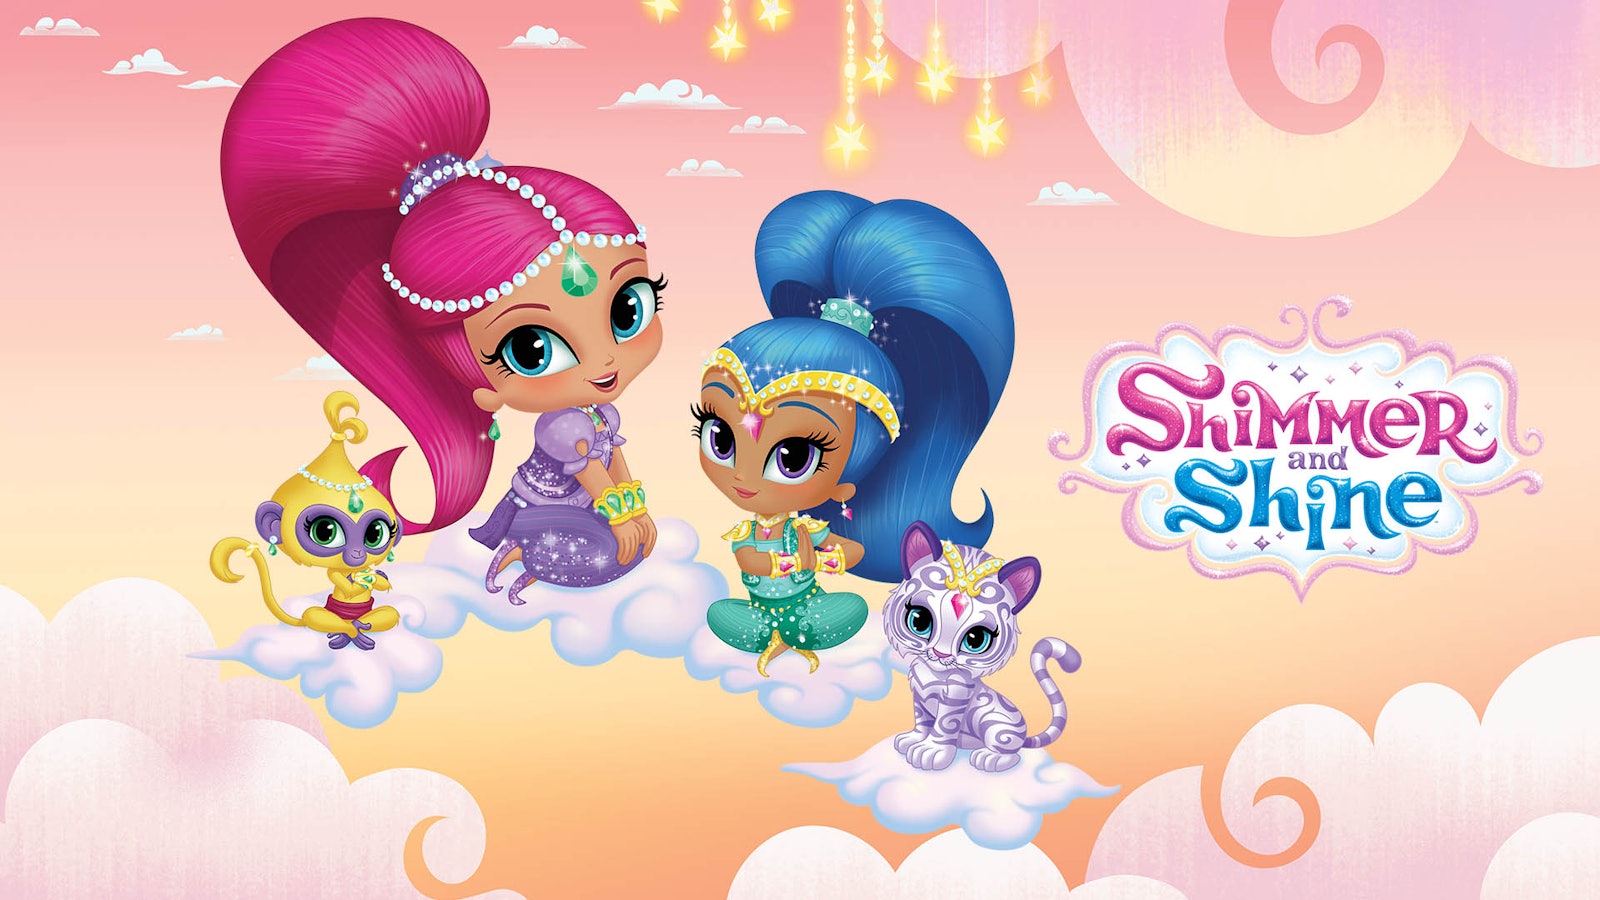 Provisional cicatriz Amplificar Shimmer and Shine - Watch Free on Pluto TV Latin America